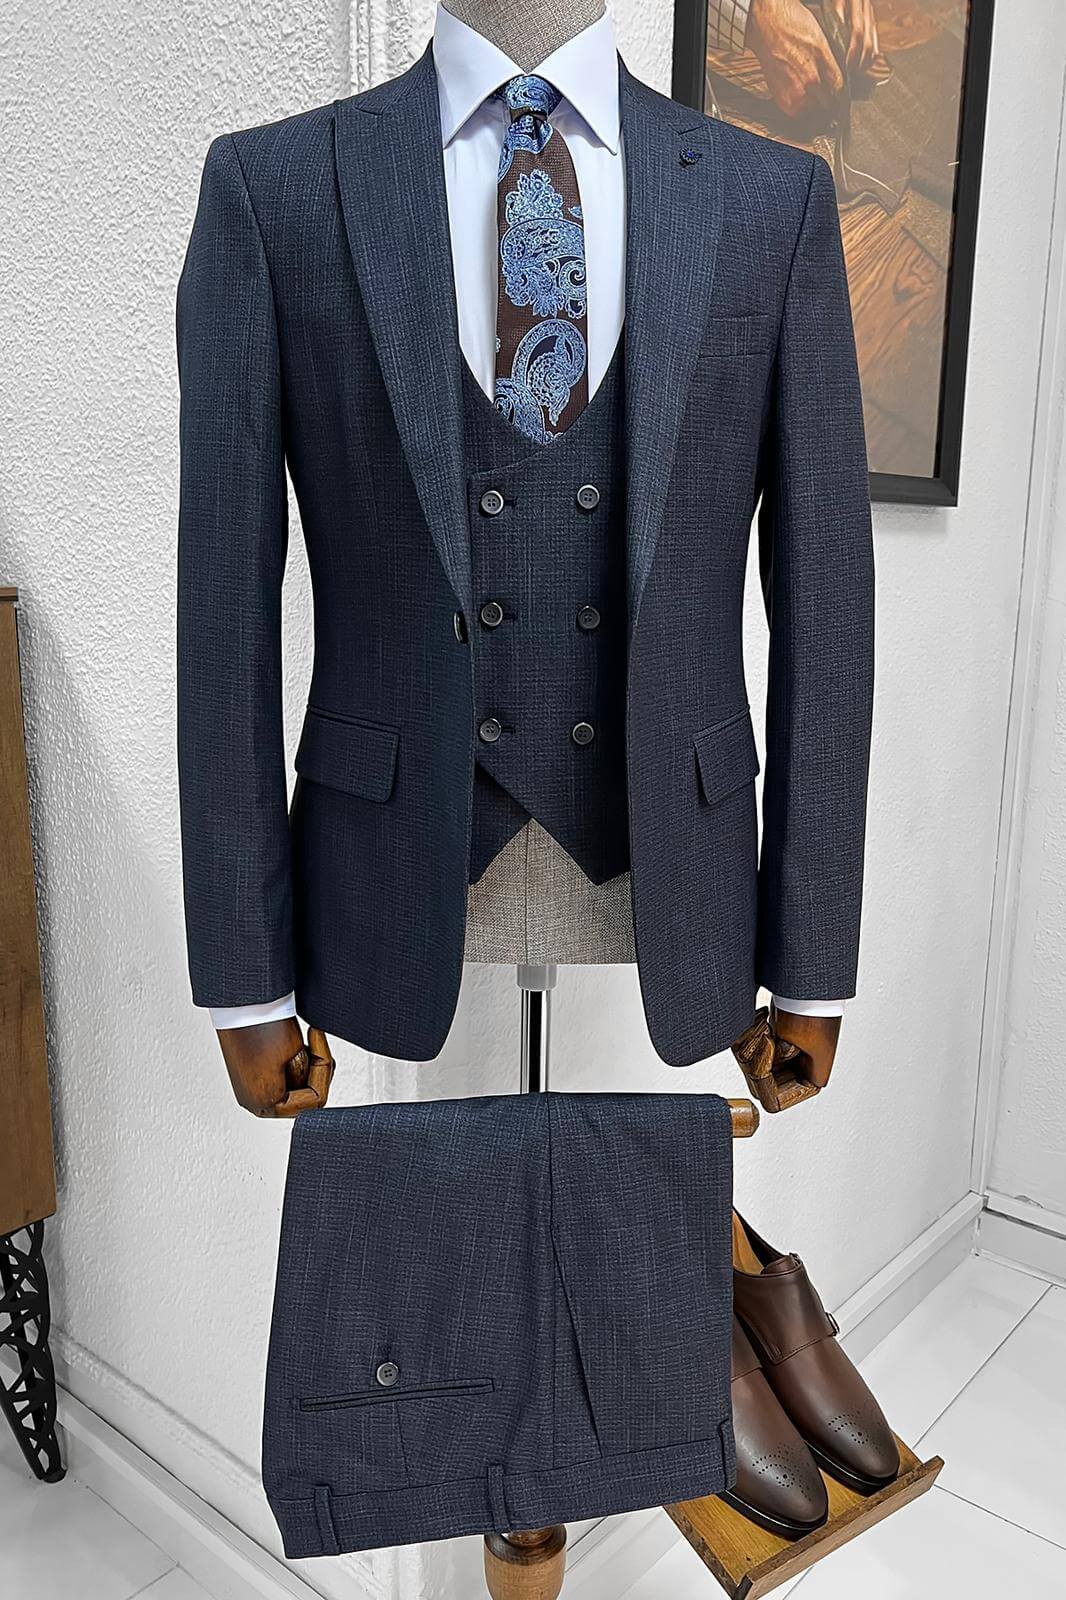 A Patterned Slim-Fit Navy-Blue Wool Suit on display